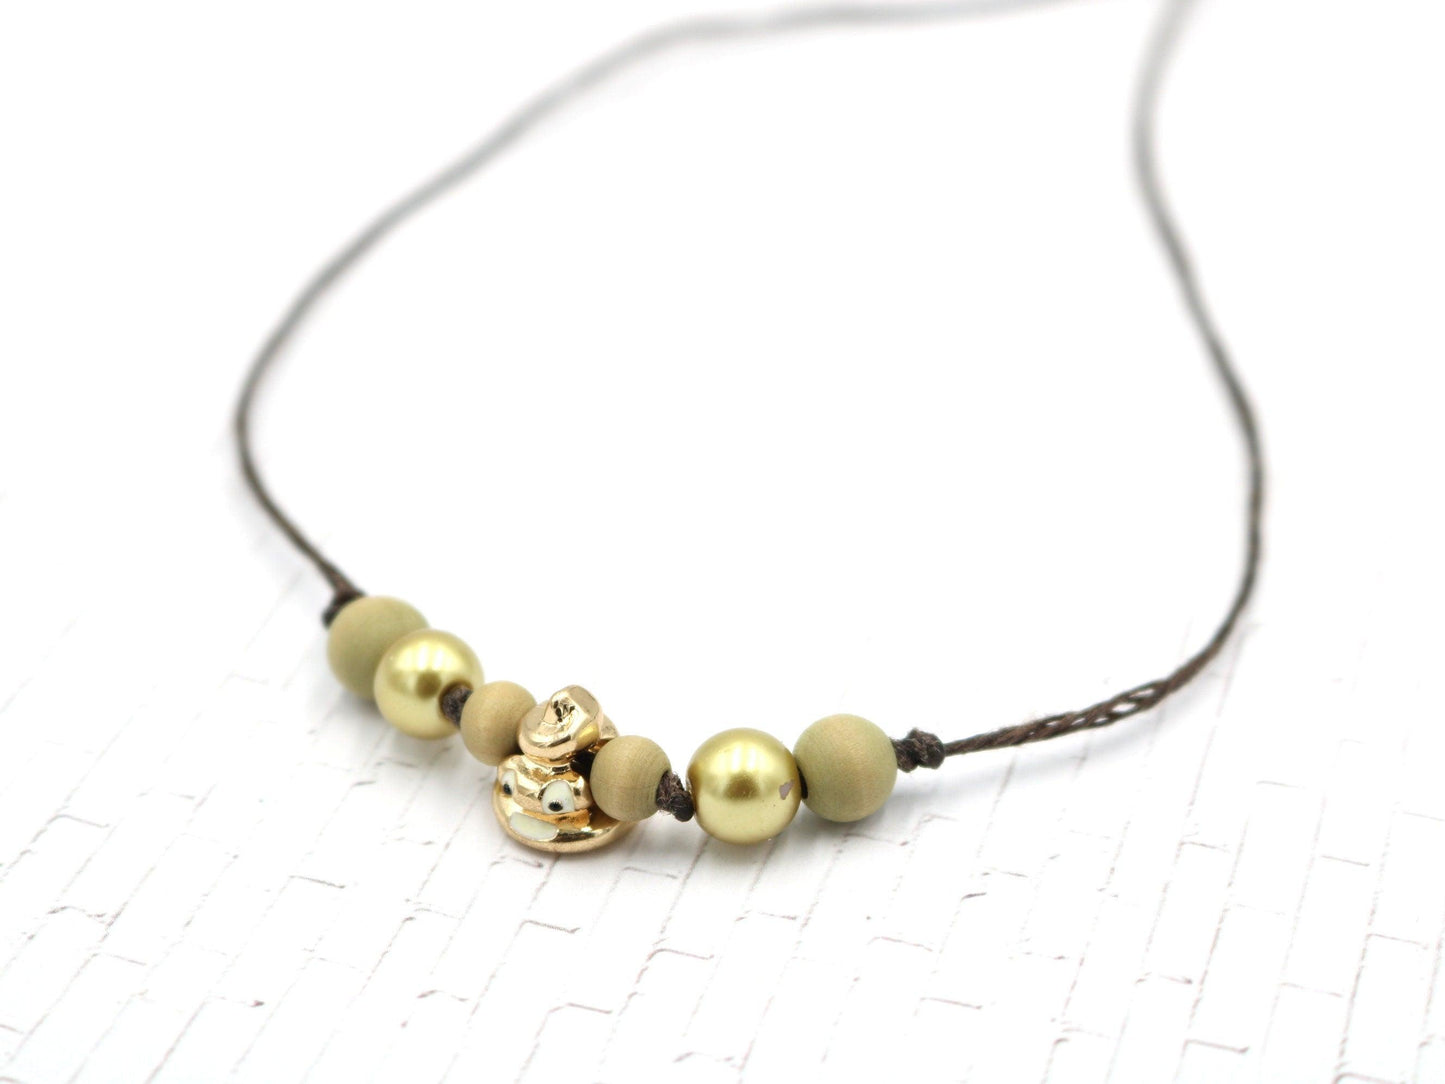 Women's Girls 18K Yellow Gold Plated Poop Emoji Charm Necklace with Wooden and Glass Beads Leather Yellow Gold Toned Hardware 19" Necklace - Monkeysmojo